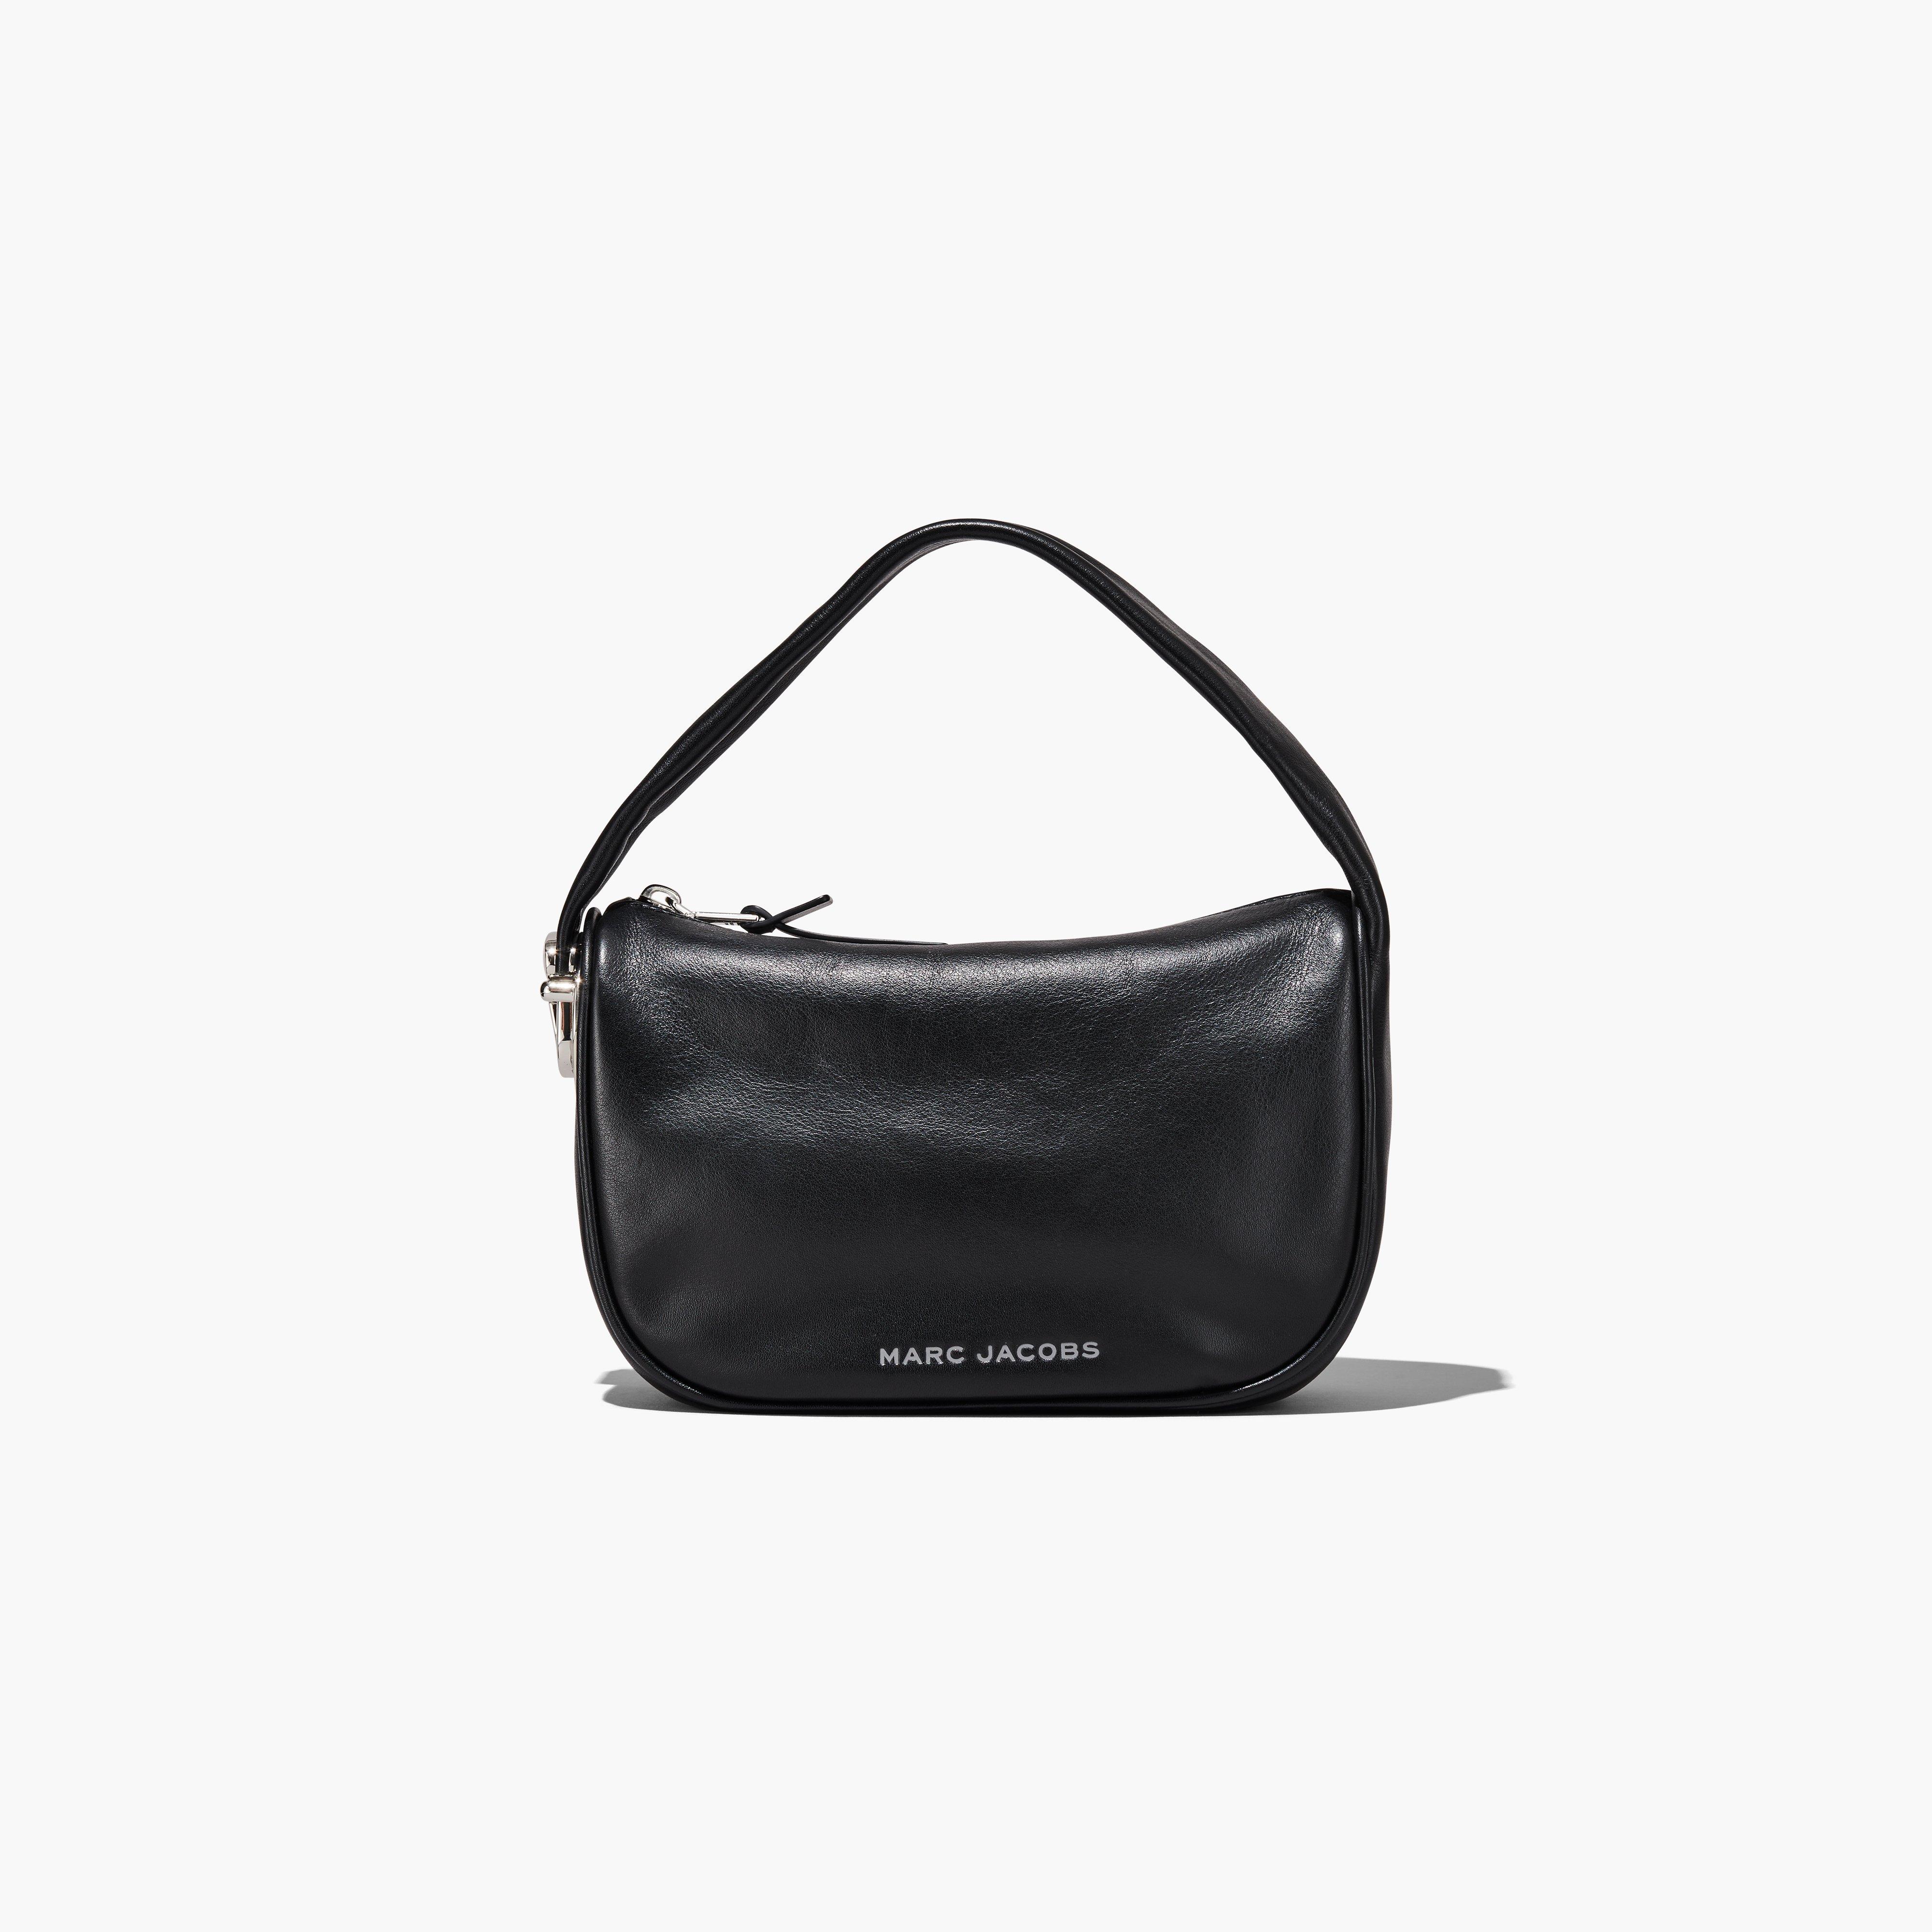 MARCJACOBSバッグ新品☆Marc Jacobs The Pushlock ホーボーバッグ ミニ マーク ...